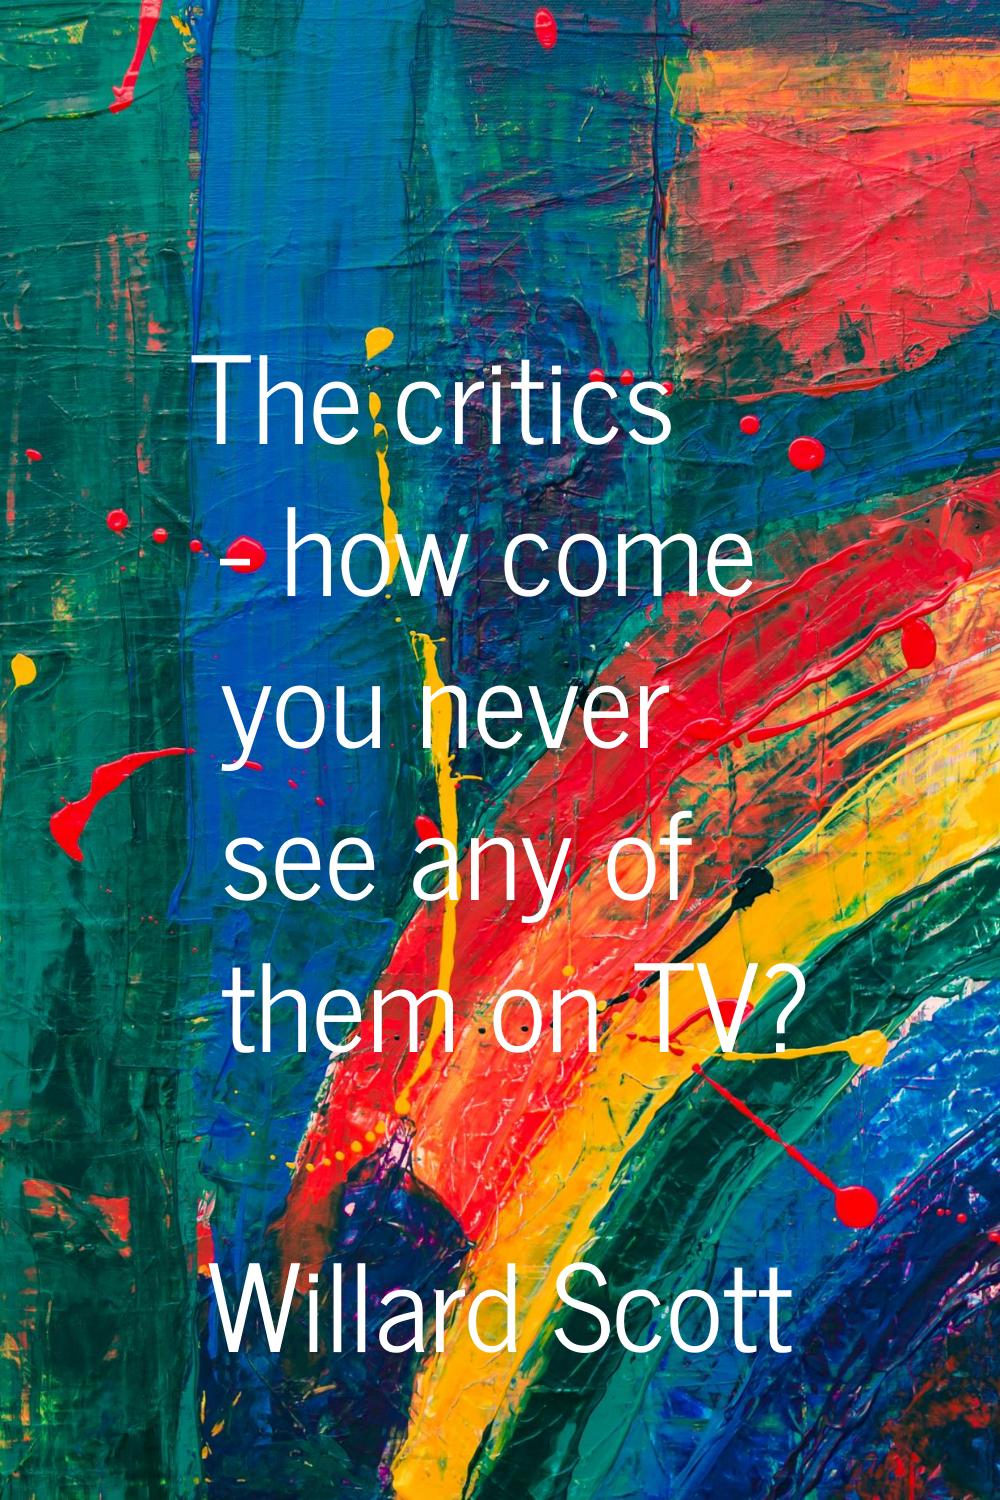 The critics - how come you never see any of them on TV?